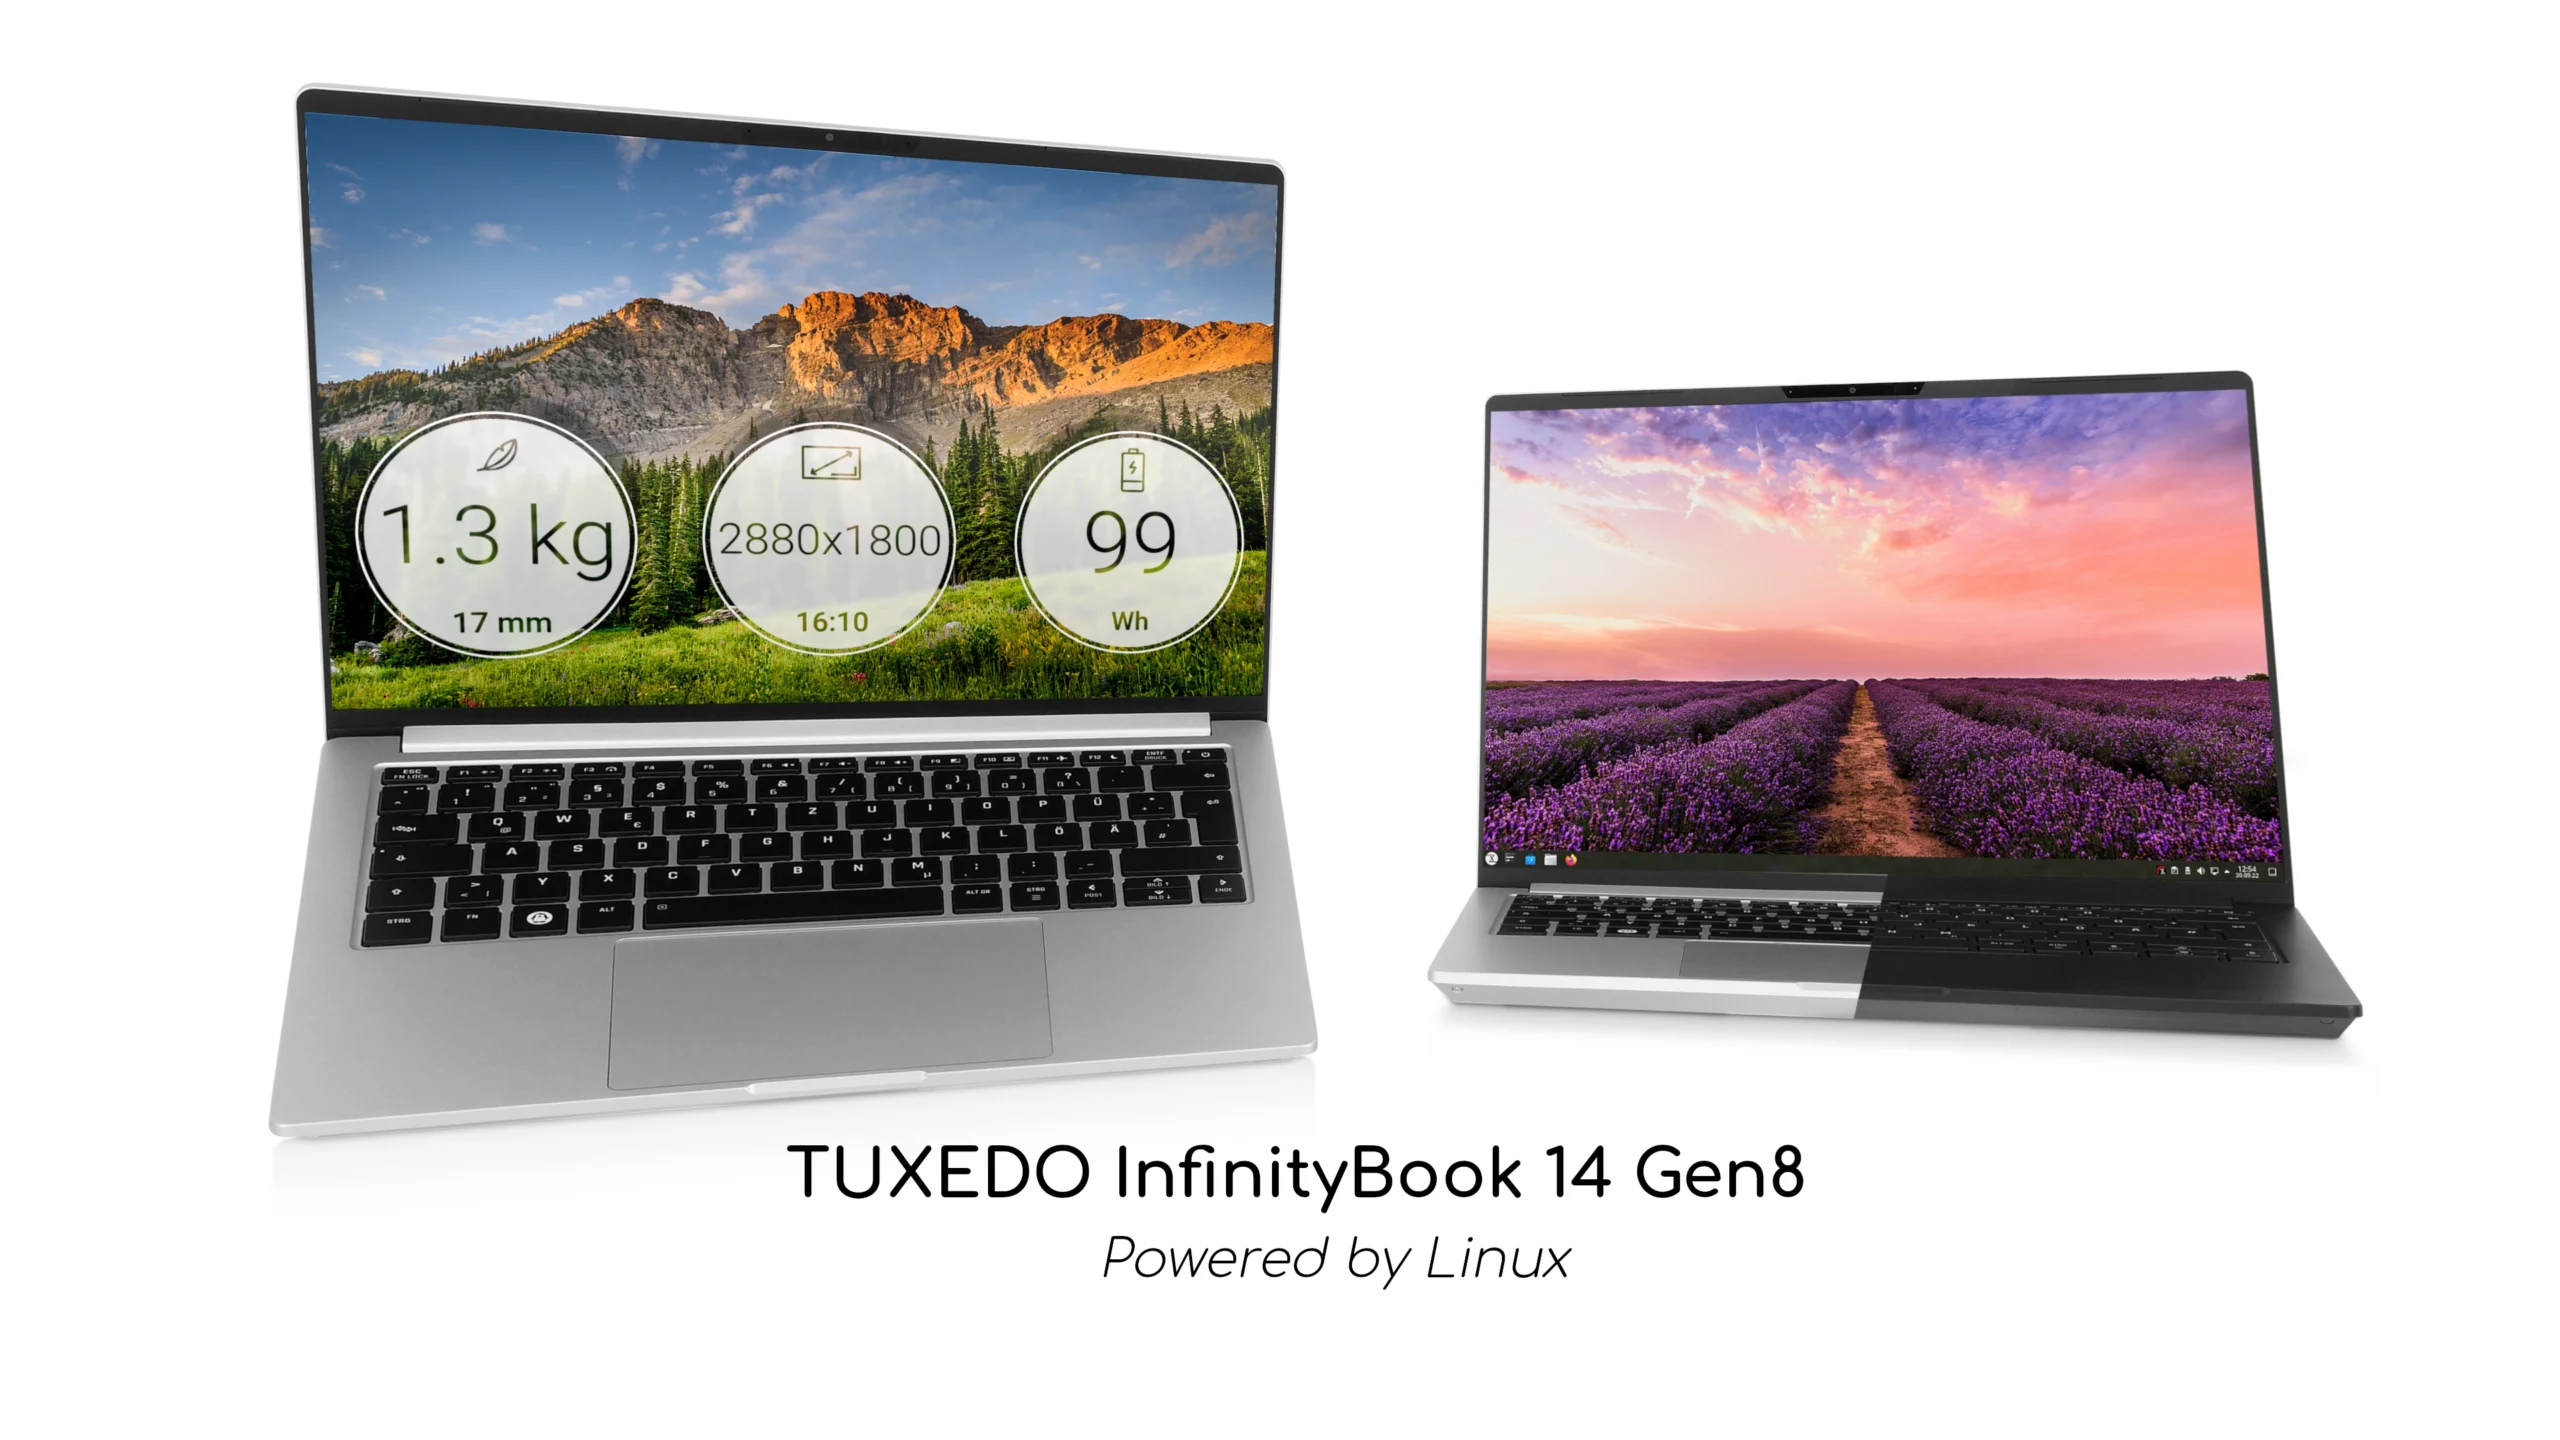 TUXEDO InfinityBook Pro 14 Gen8 Linux Ultrabook Is Now Available for Pre-Order